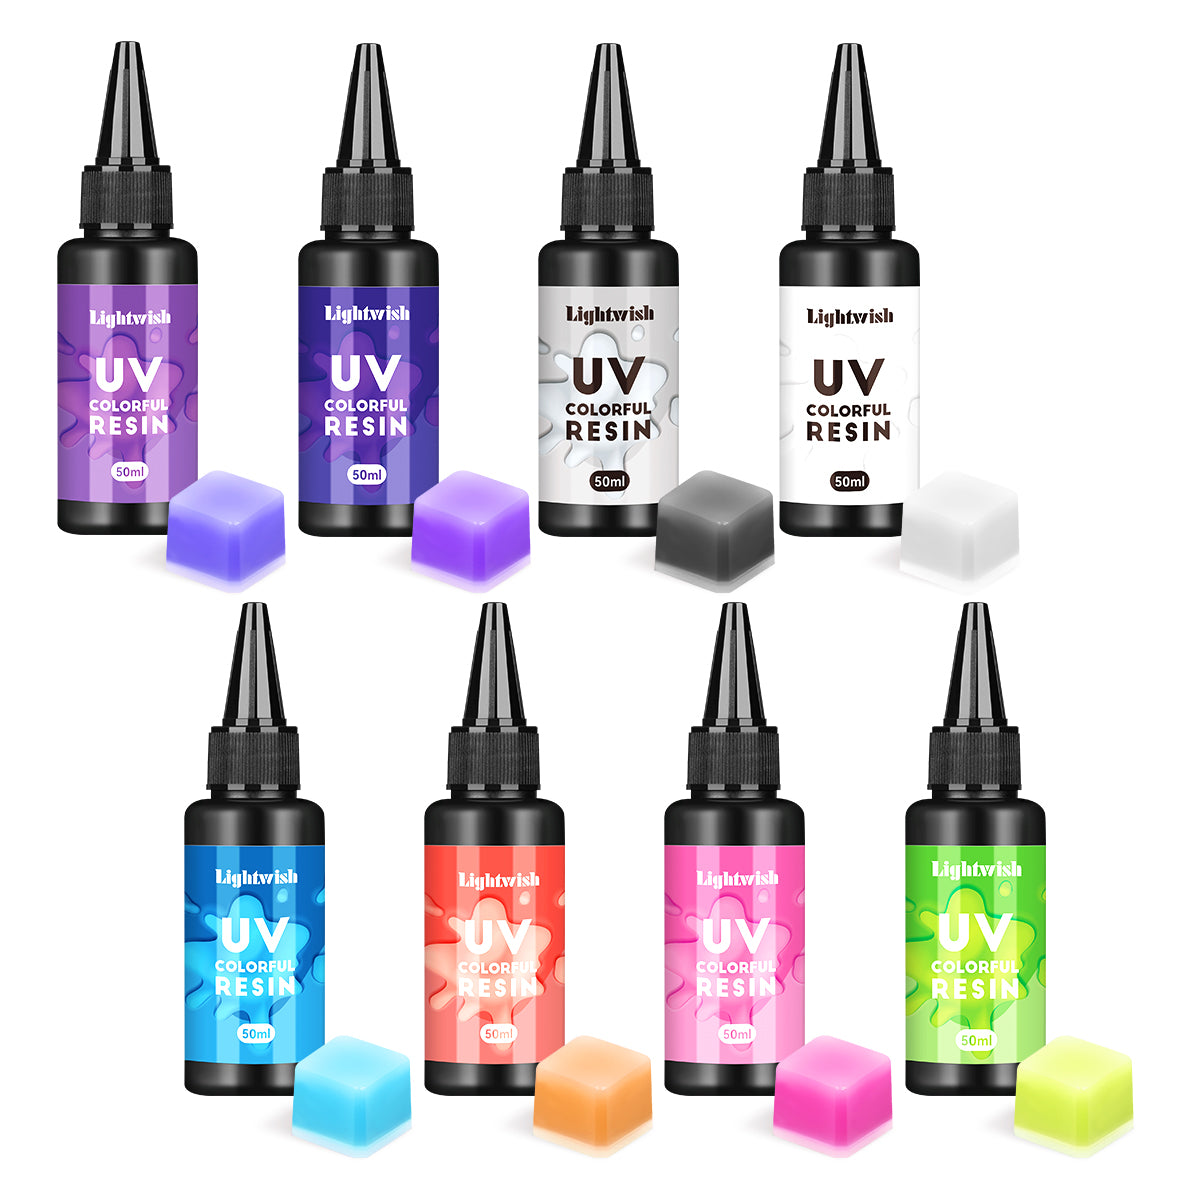 14 Colors, Colored UV-LED Resin, Each 25g, 13 Colors 1 Clear